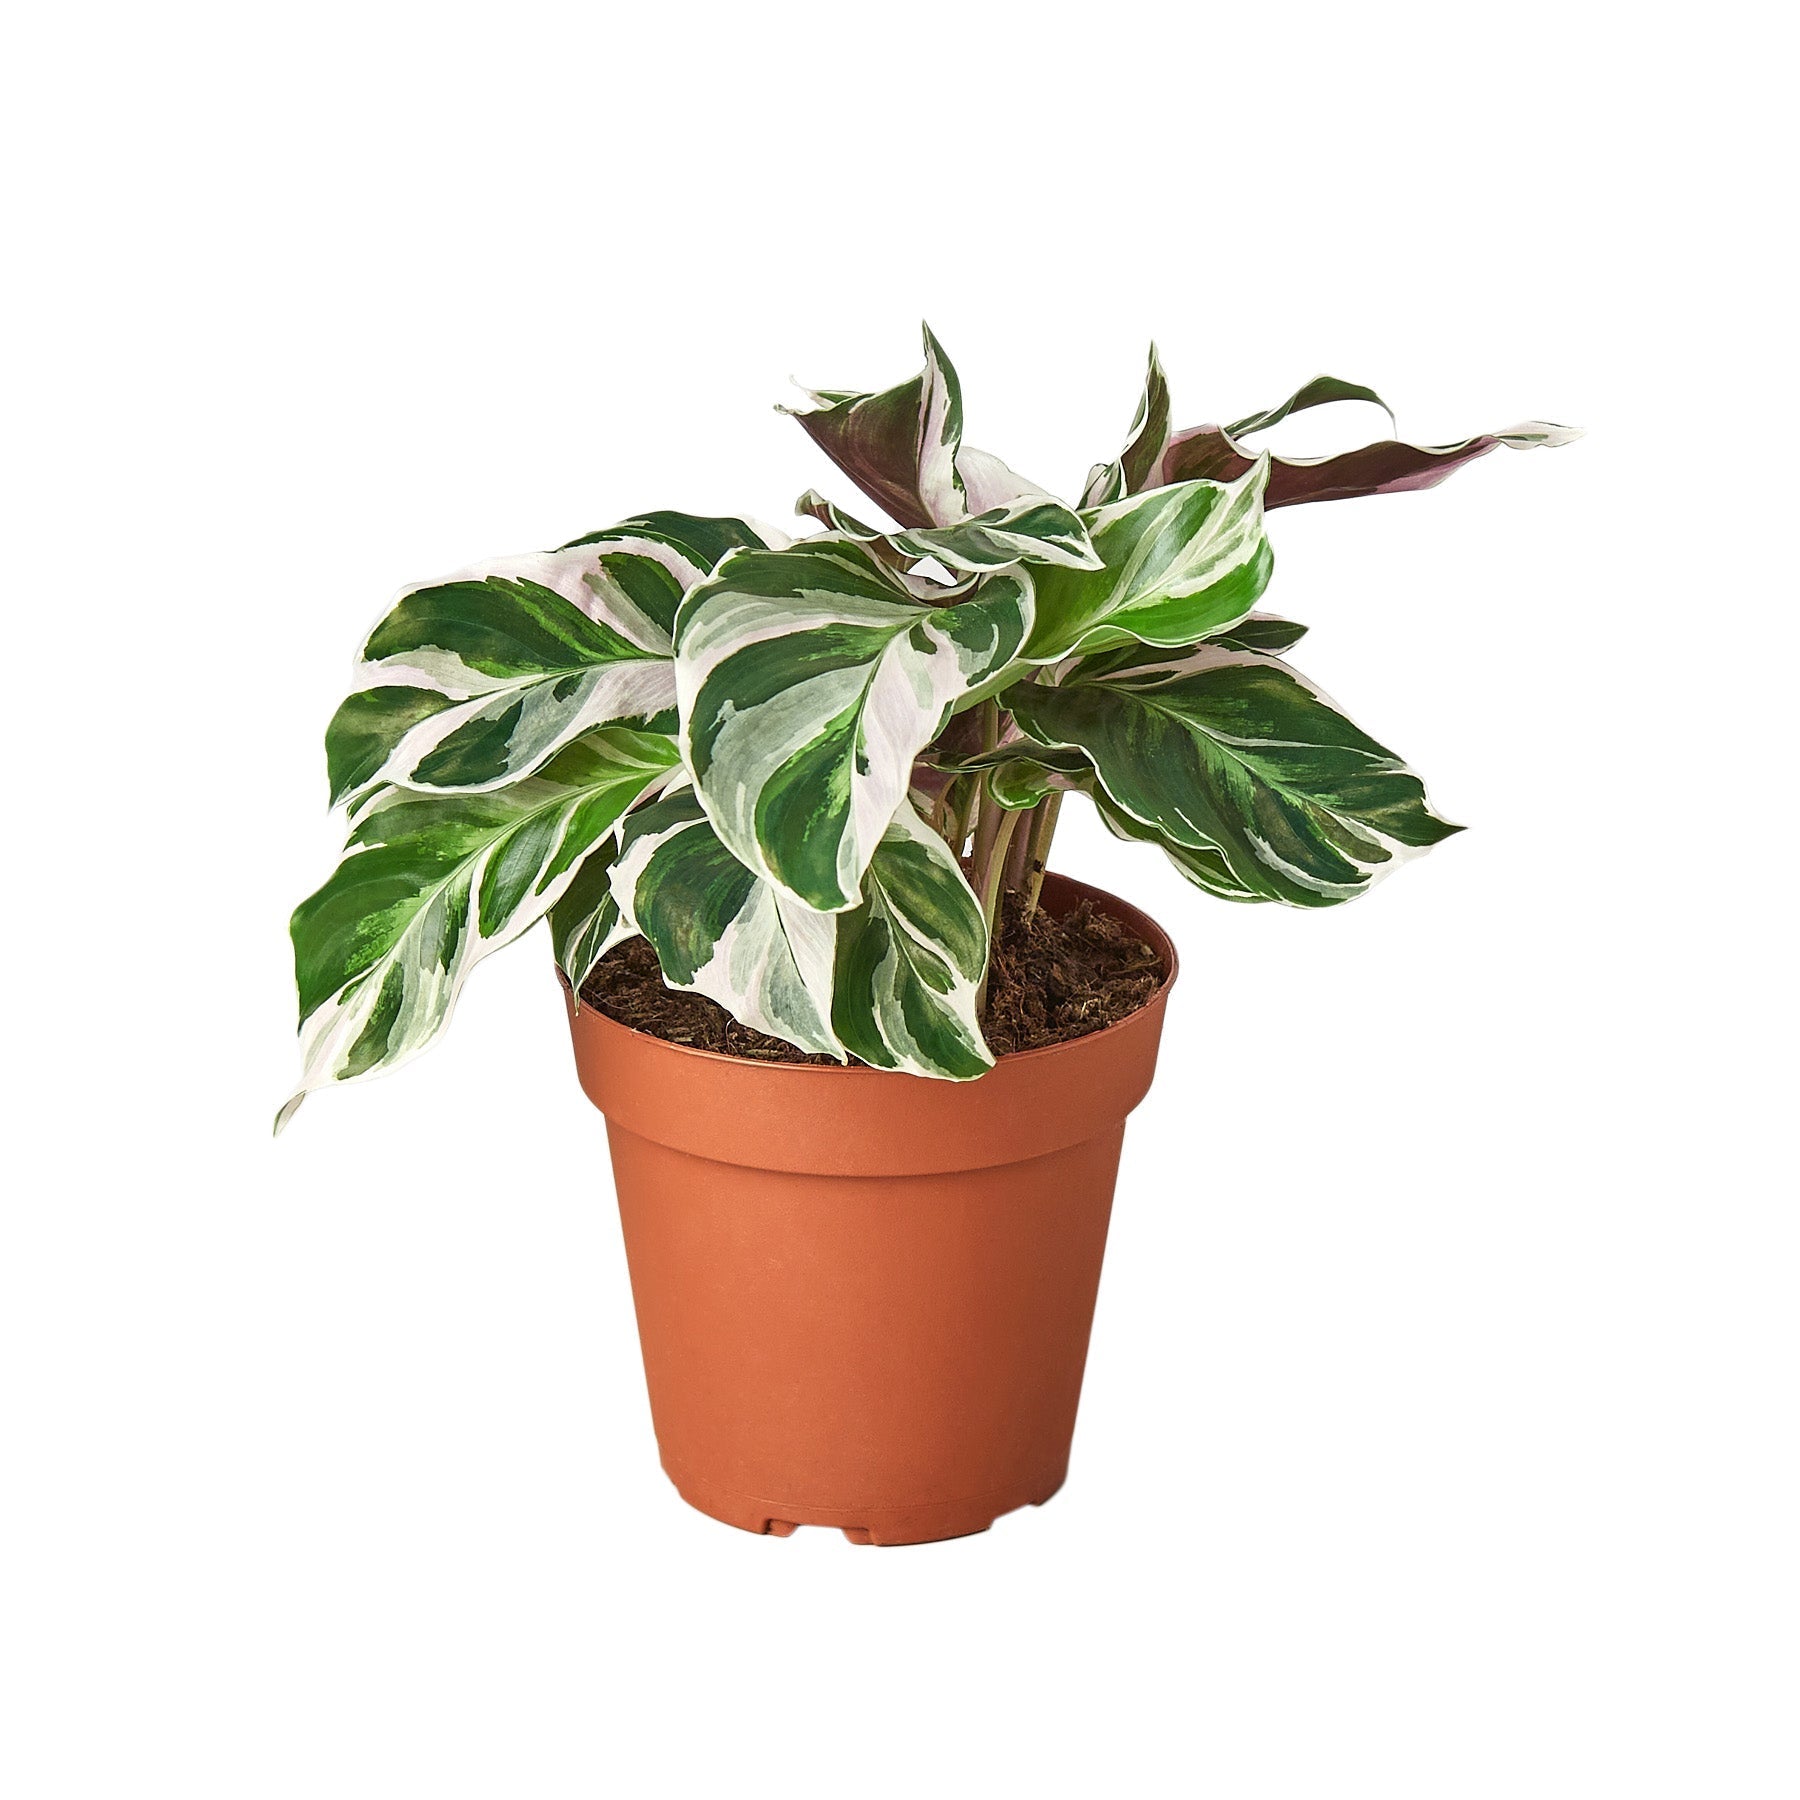 A potted plant on a white background at a top garden center near me.